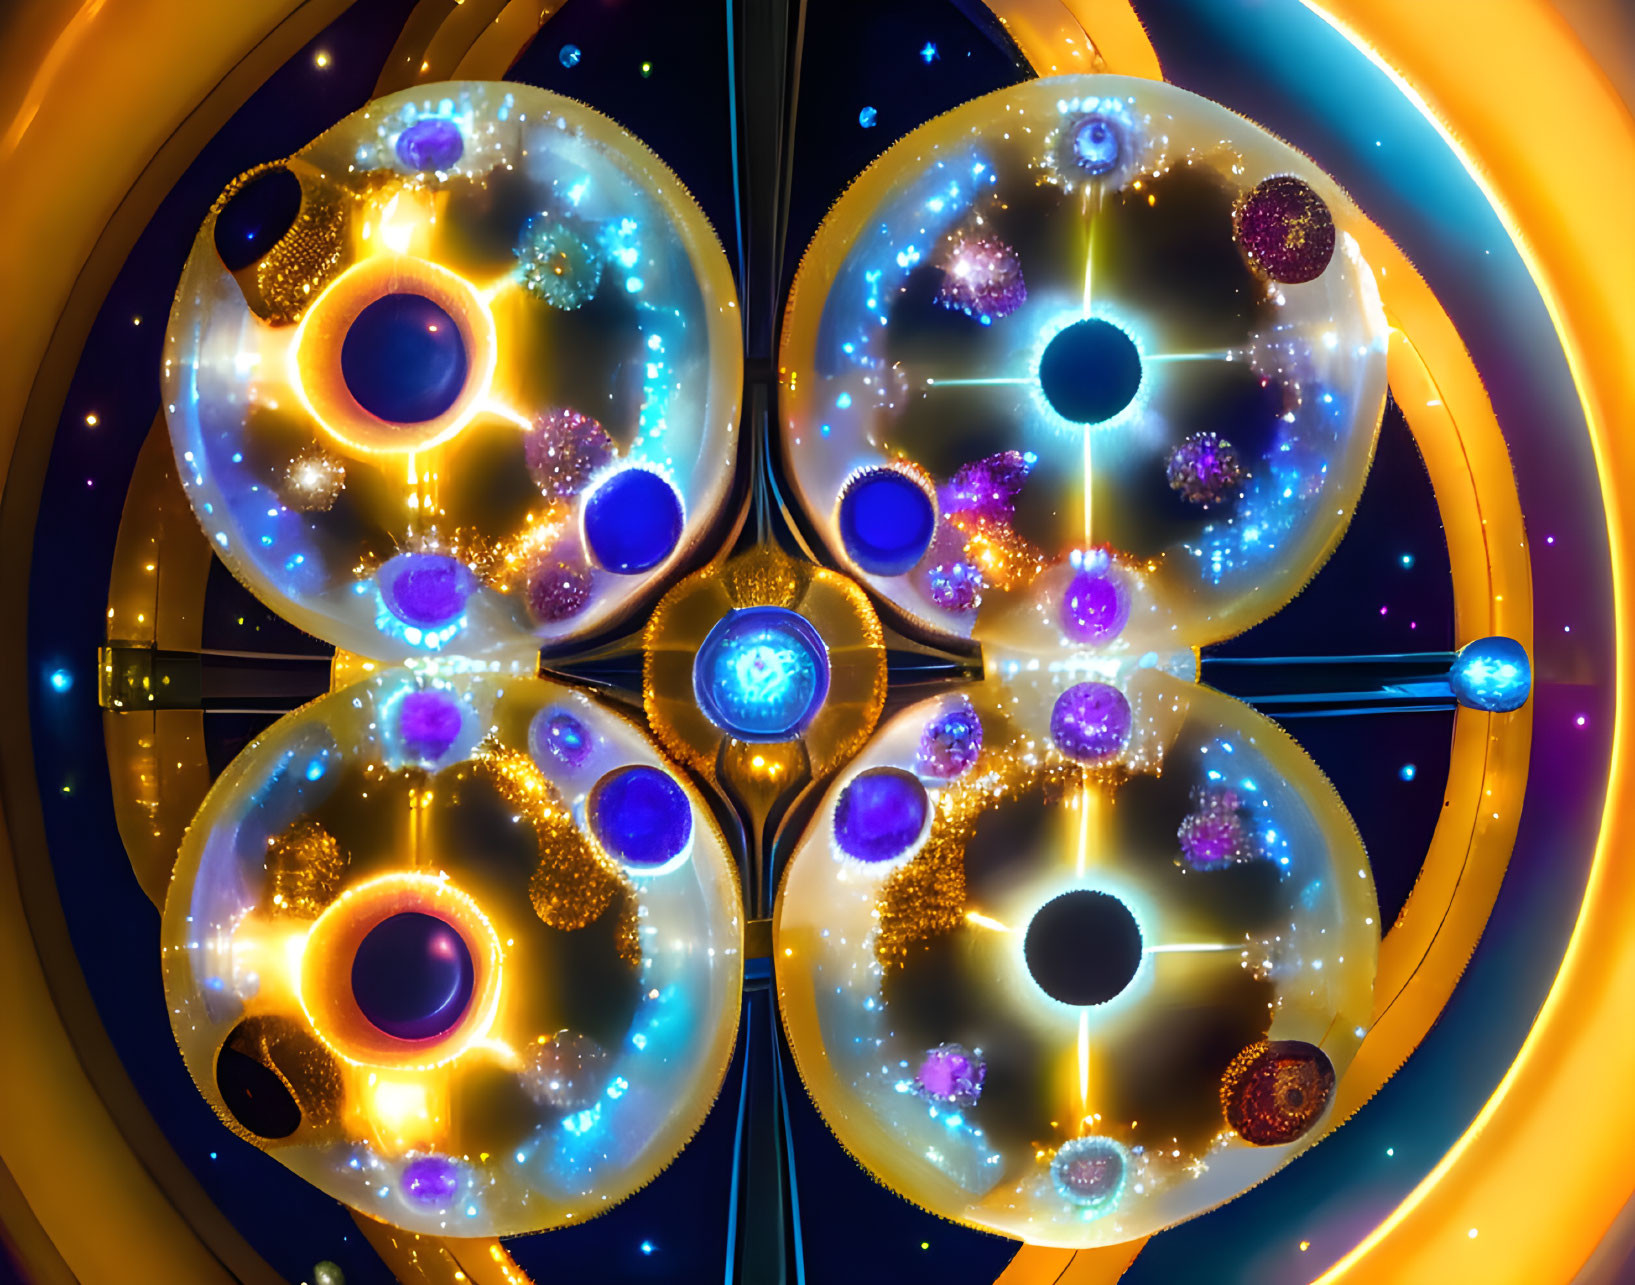 Abstract Fractal Image with Symmetrical Patterns and Glowing Orbs